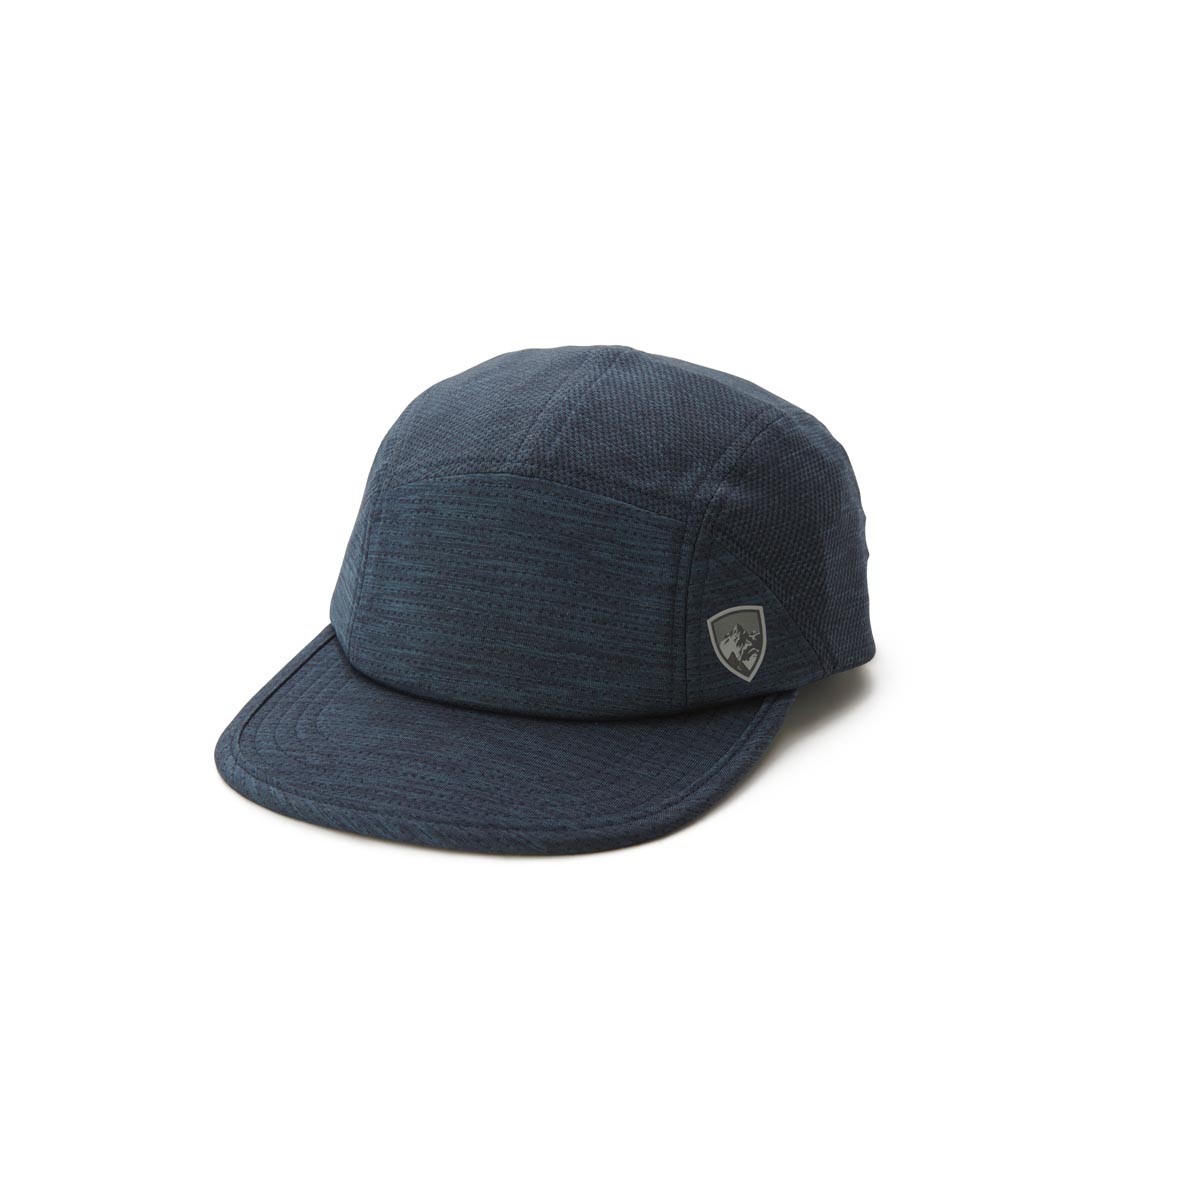 http://www.getzs.com/images/products/109694/full_916_kuhl-engineered-hat_pirate-blue_front.jpg